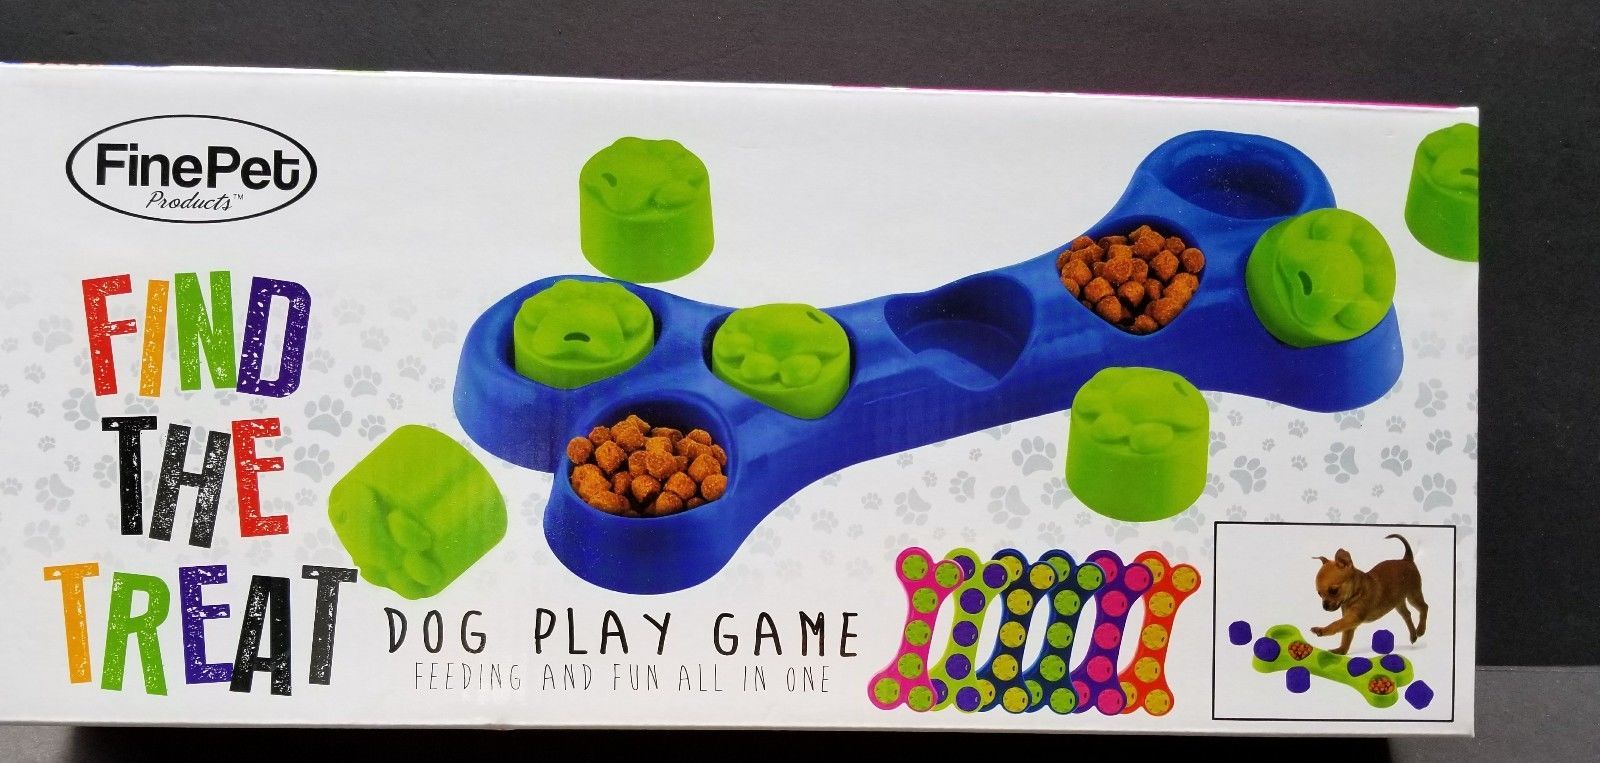 Dog Play Game Puppy Find the Treat Feeding Tricks Cat Kitty Kitten  FinePet - $23.75